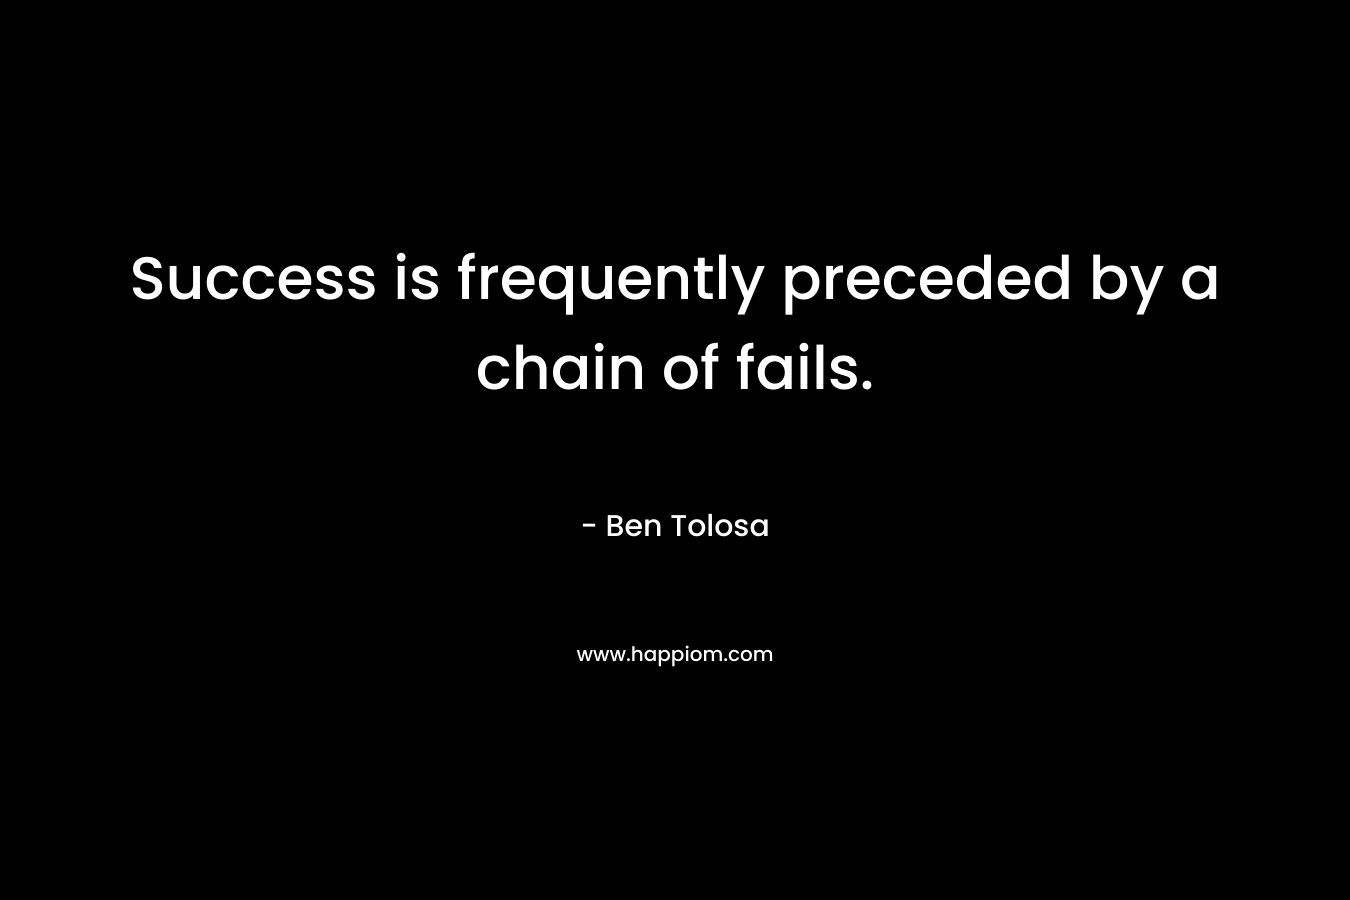 Success is frequently preceded by a chain of fails. – Ben Tolosa